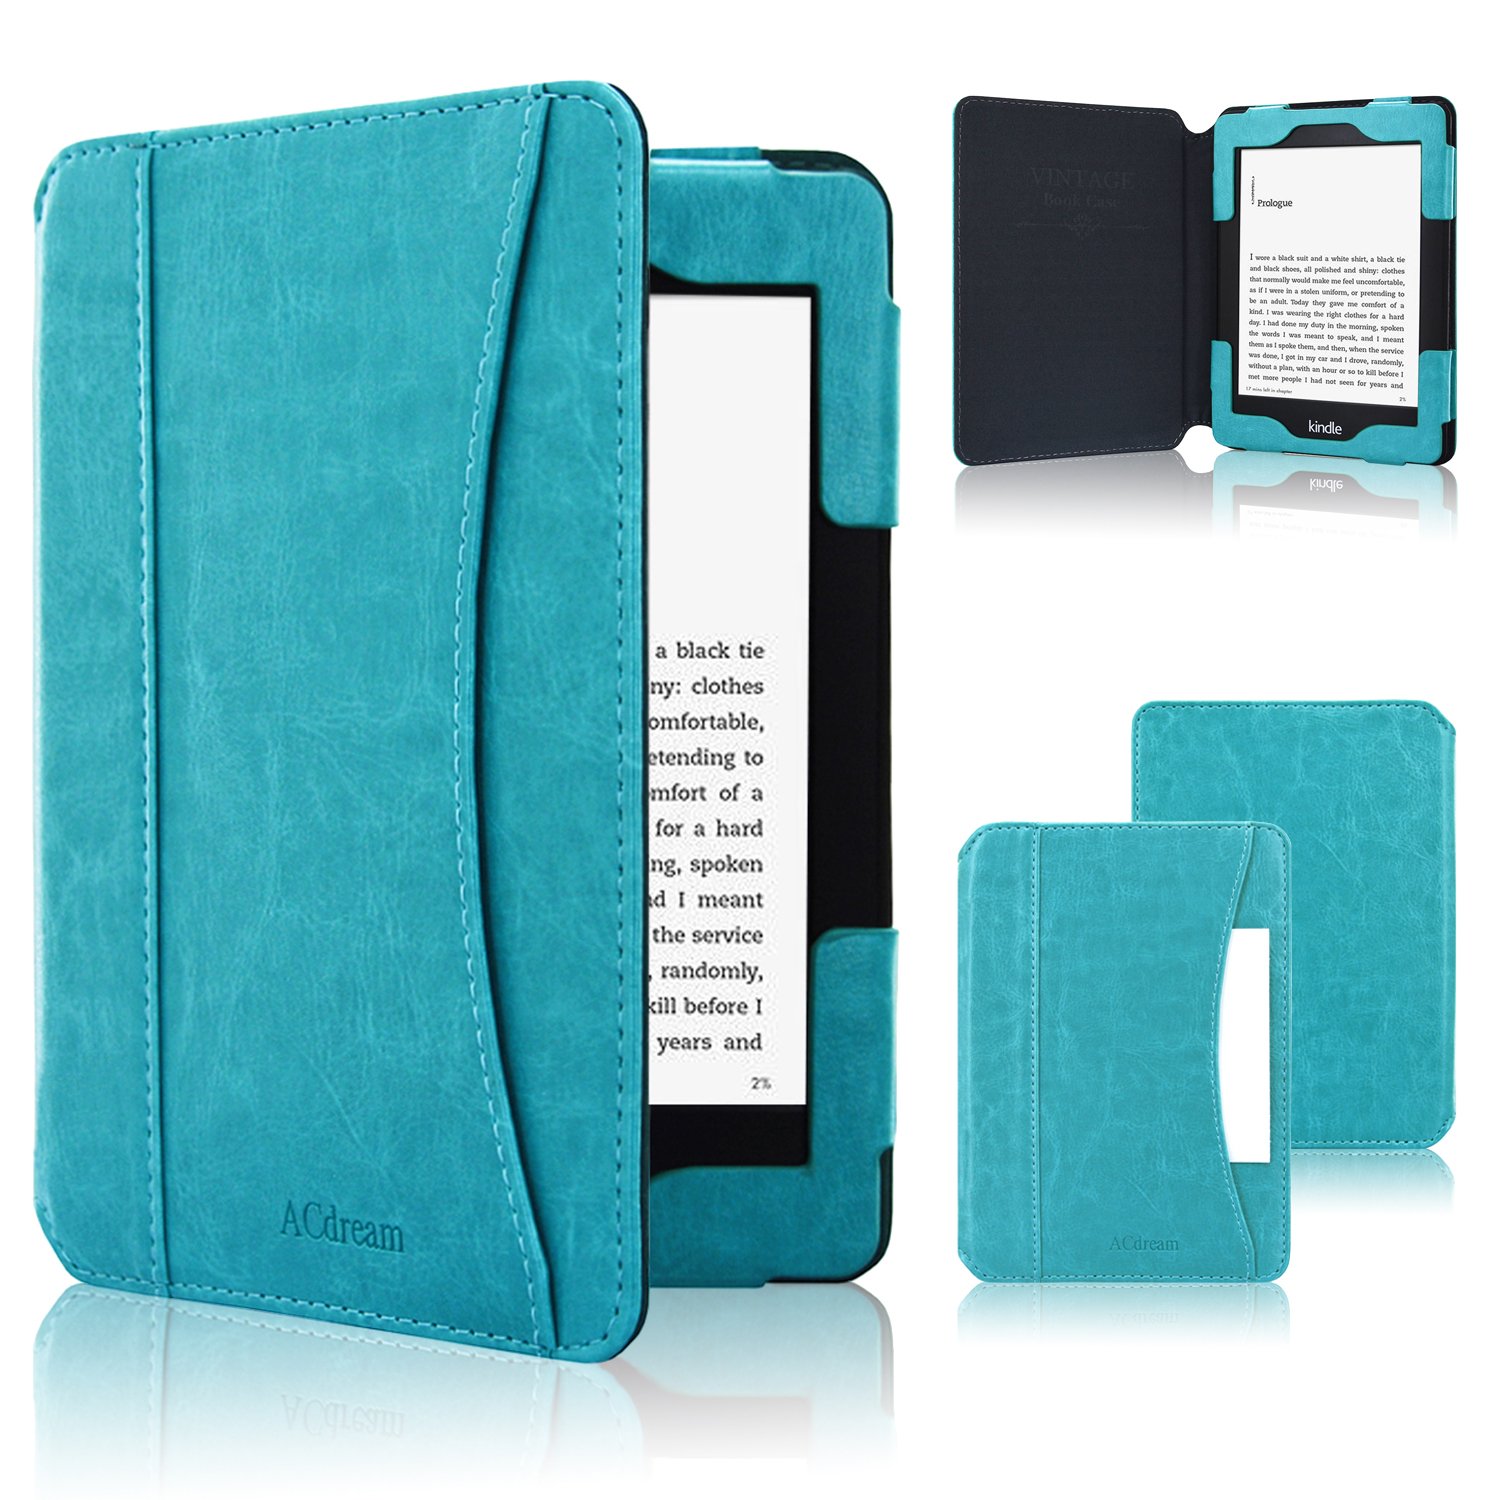 Book Cover ACdream Case for Kindle Paperwhite, Folio Smart Cover Leather Case with Auto Sleep Wake Feature for All New and Previous Kindle Paperwhite Models, Sky Blue sky blue1